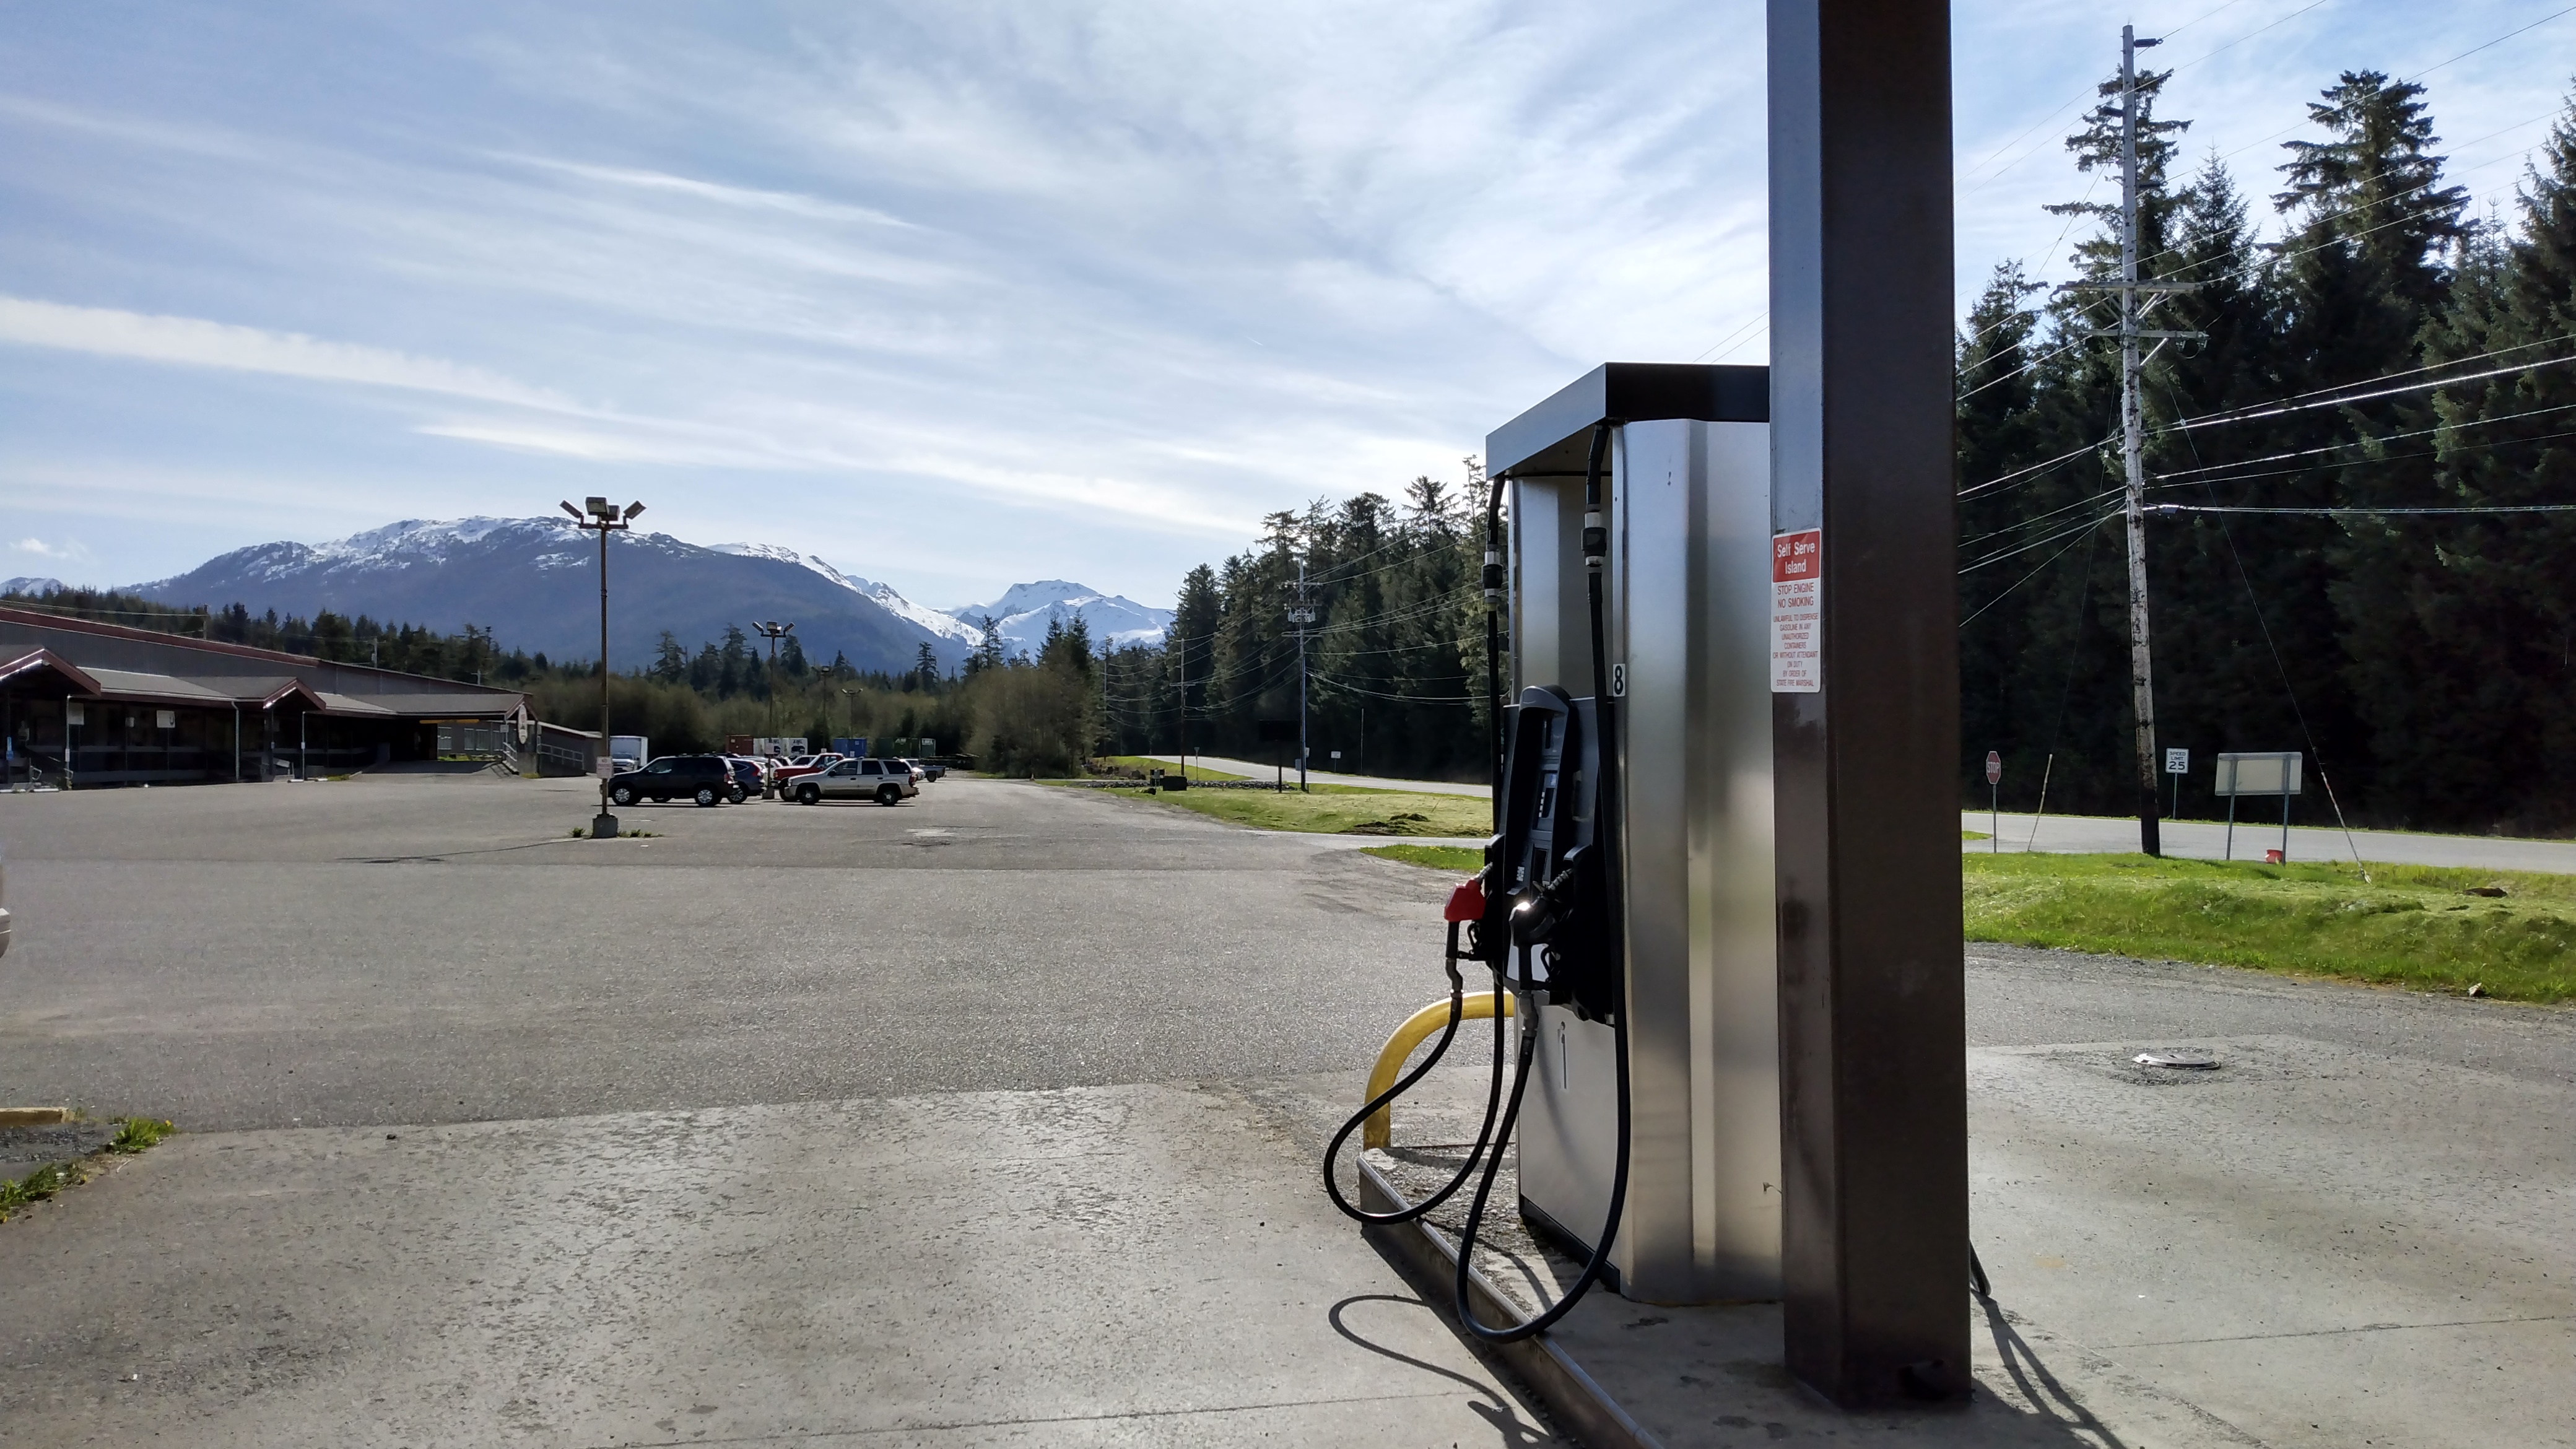 A gas-station pump in the foreground, with semi-desolate a parking lot in the middle ground and highway and trees and snowy mountains in the receding farther distance